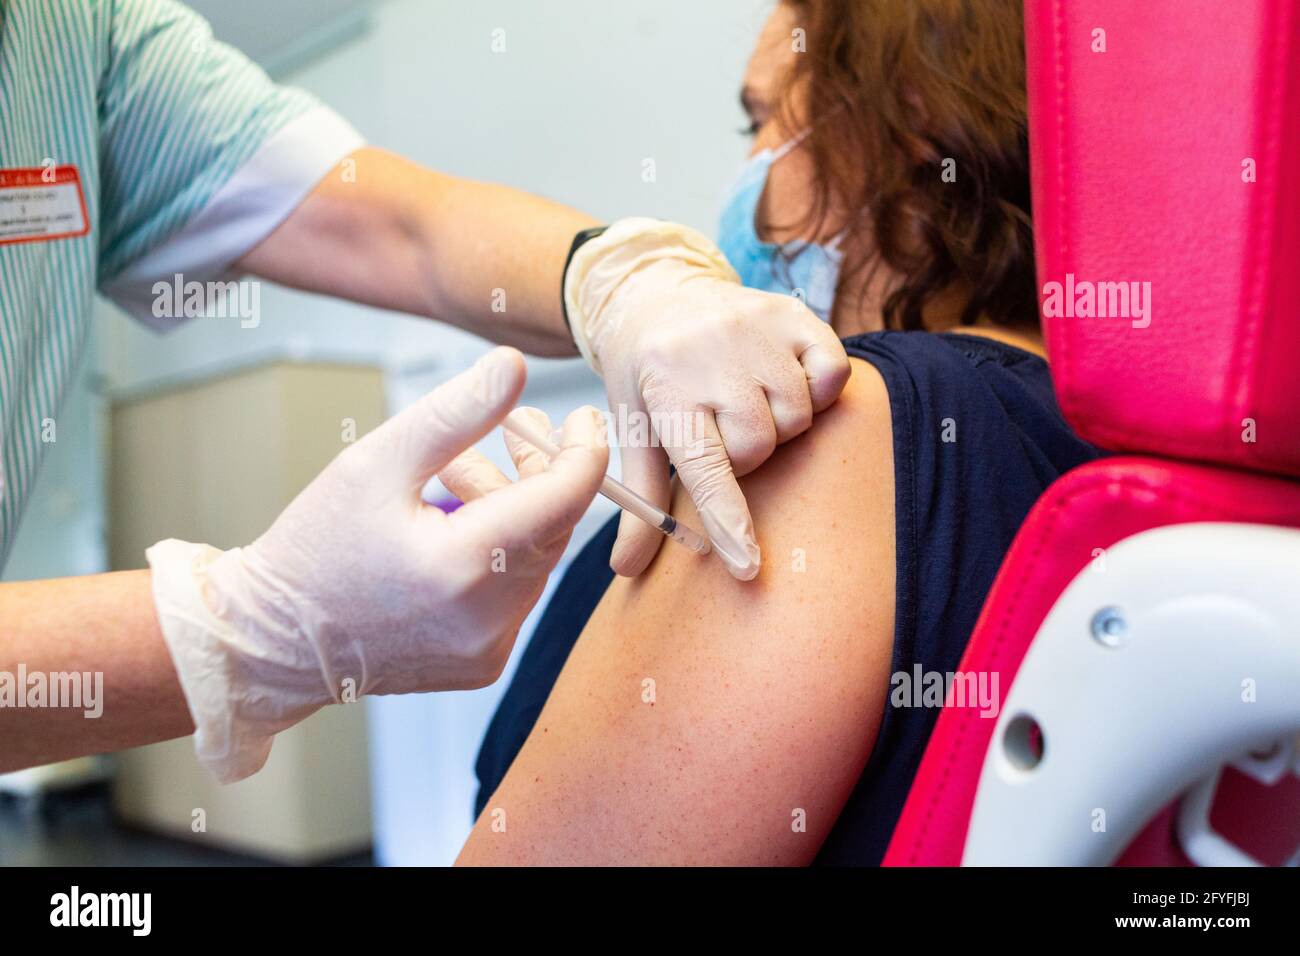 Pfizer-BioNTech BNT162b2 Covid-19 vaccine, Bordeaux, France, may 19, 2021. Stock Photo